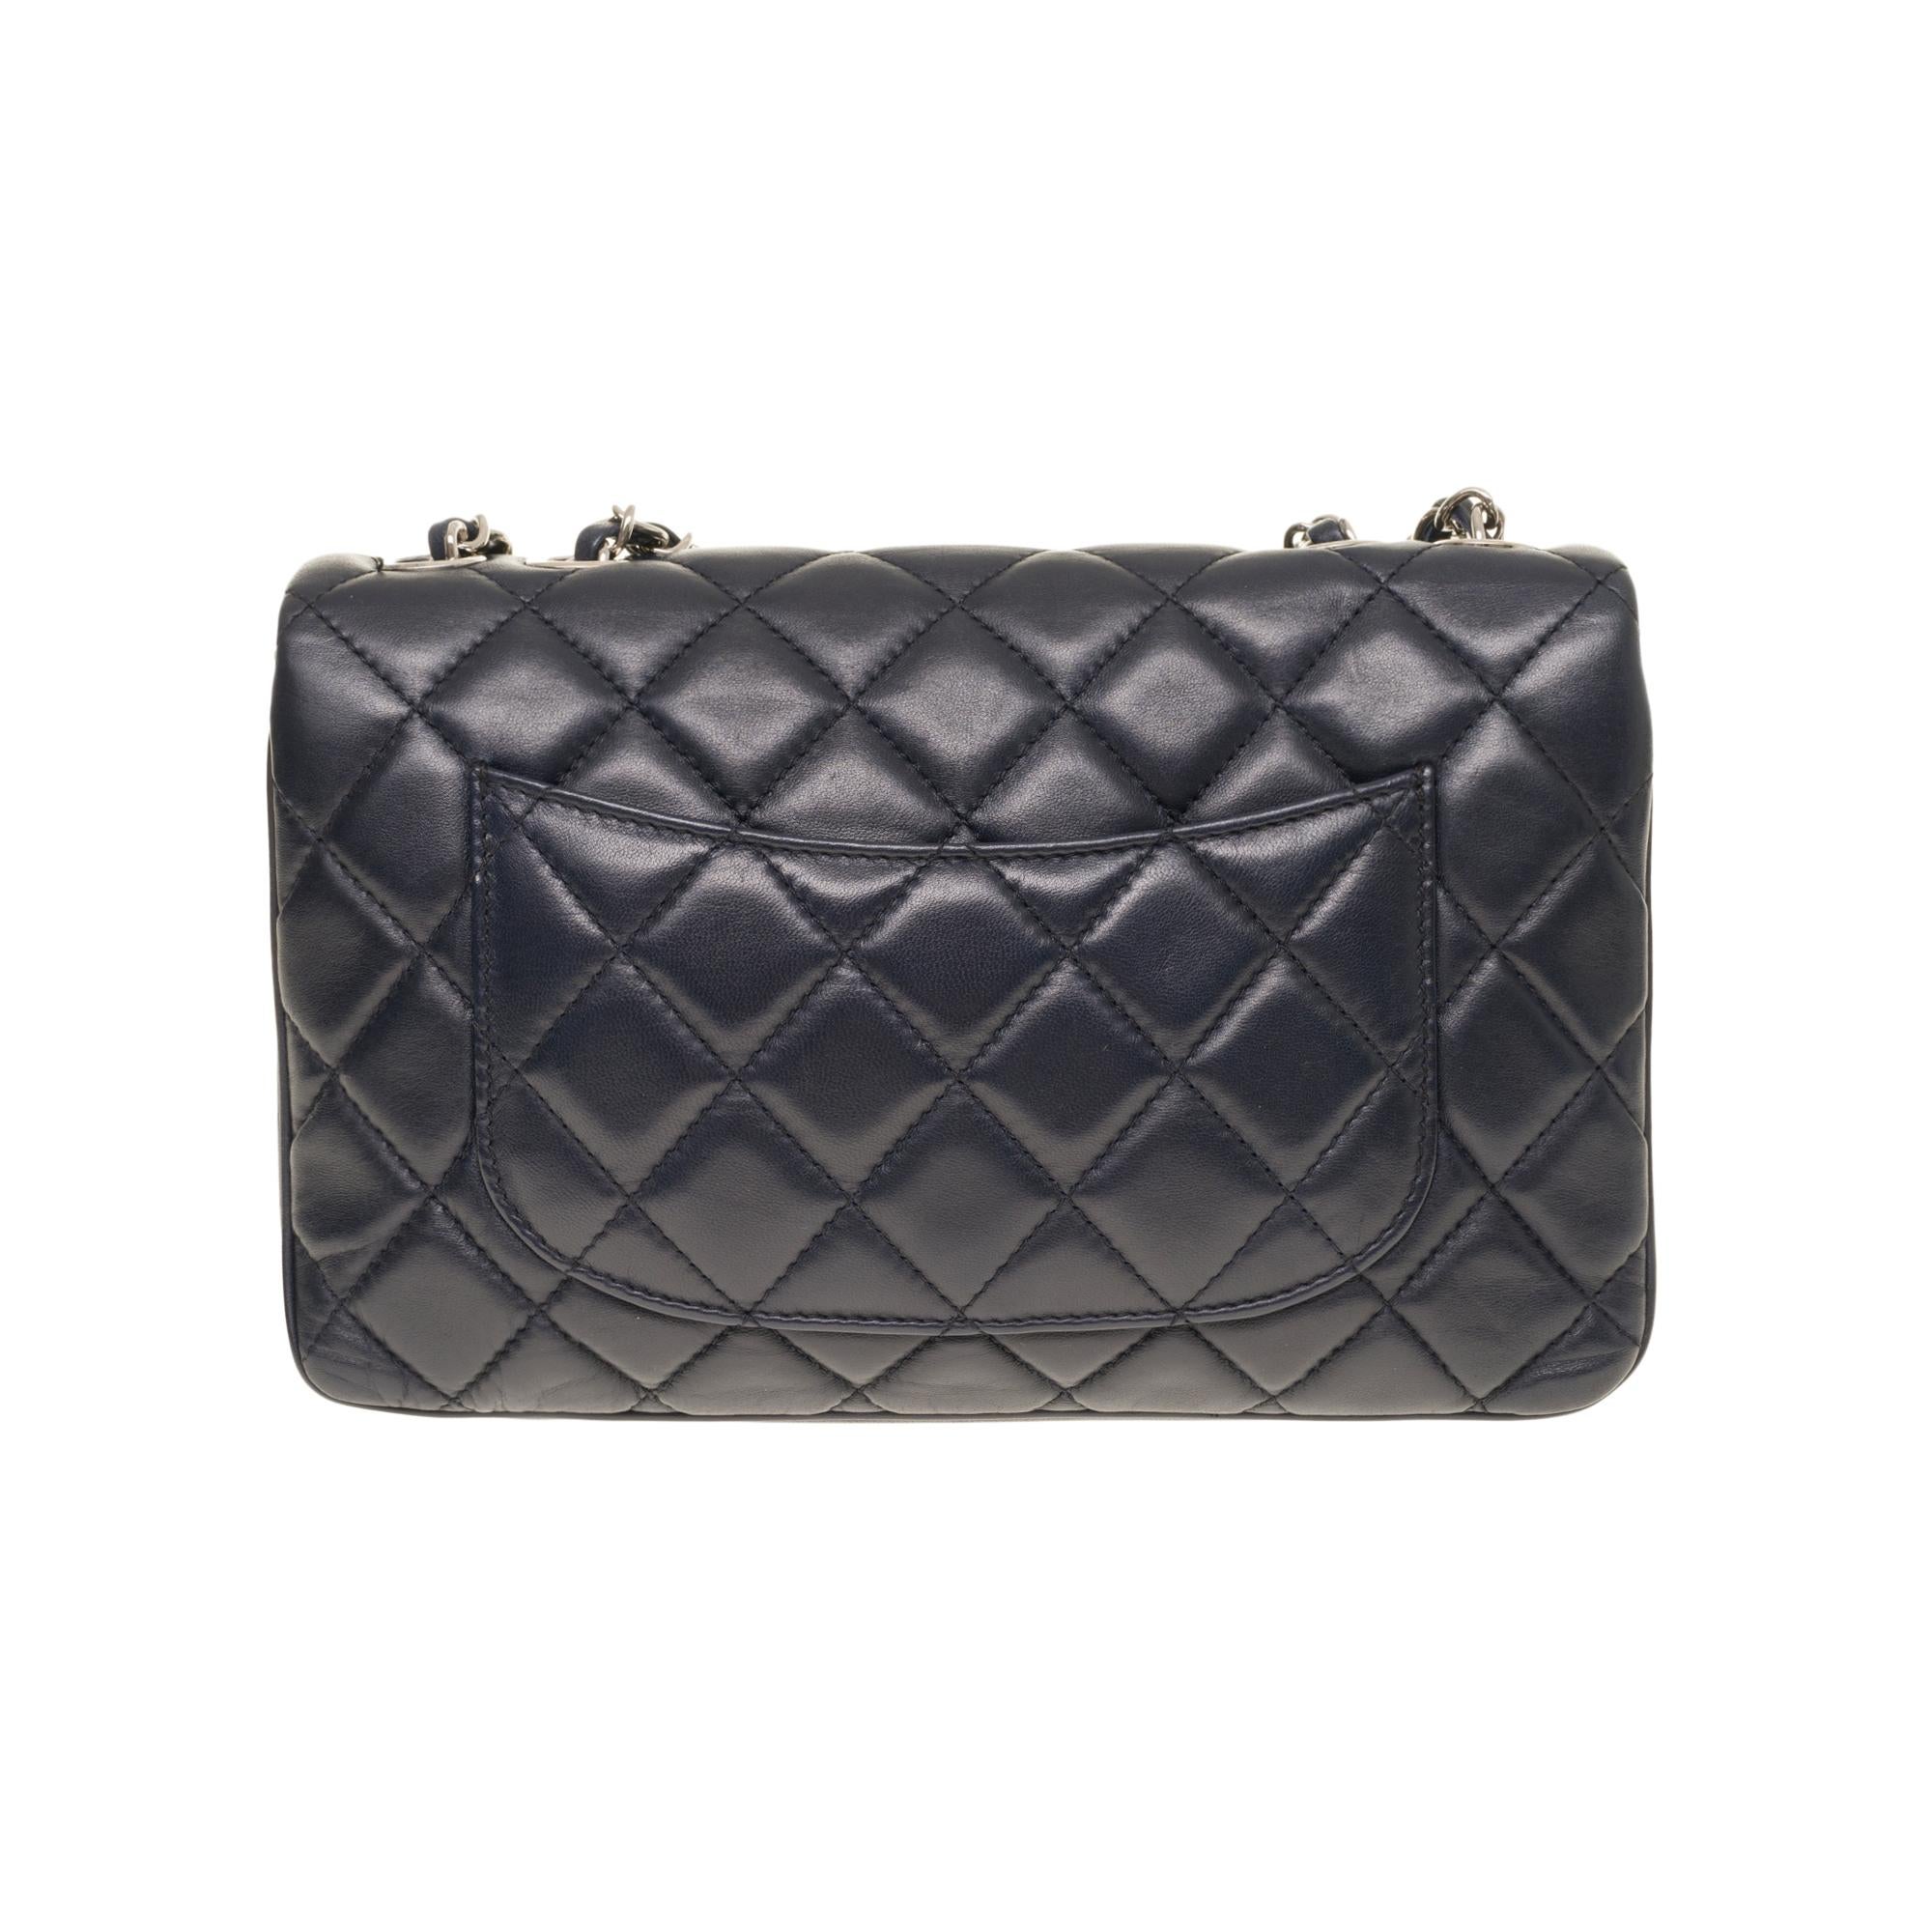 Splendid and Rare Chanel Classic 25cm in navy blue quilted lambskin leather, silver metal hardware, silver metal chain interwoven with navy blue leather
Flap closure, silver CC symbol clasp
Lining in navy fabric with 3 compartments, 1 double patch